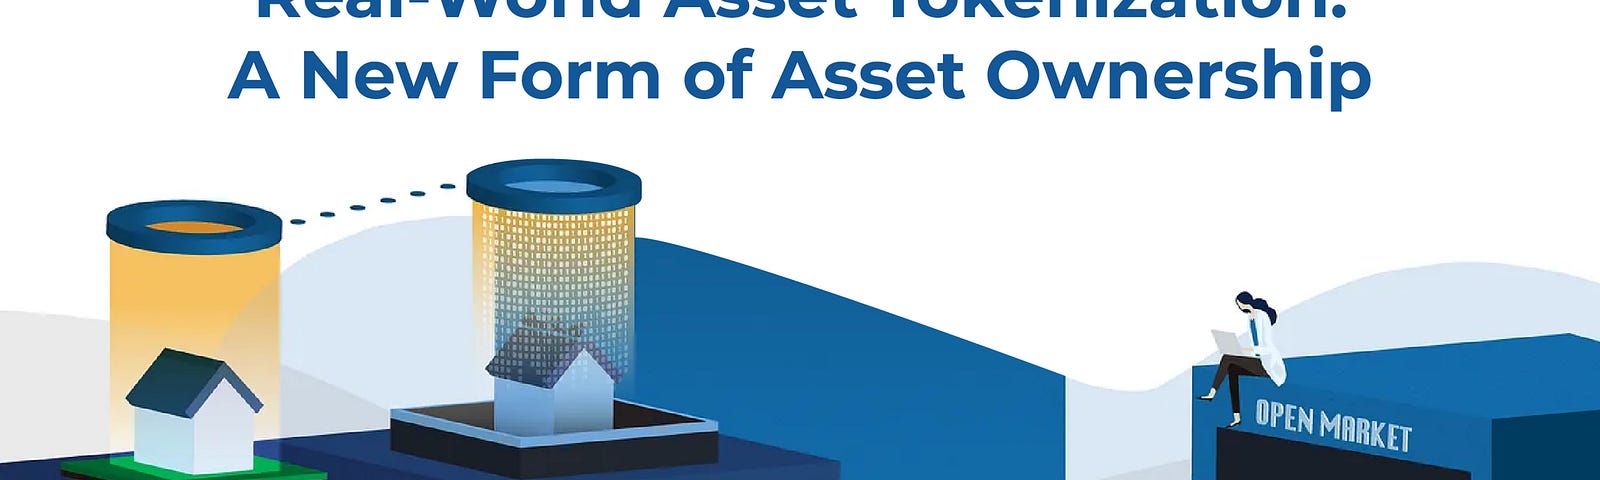 Real-World Asset Tokenization: A New Form of Asset Ownership